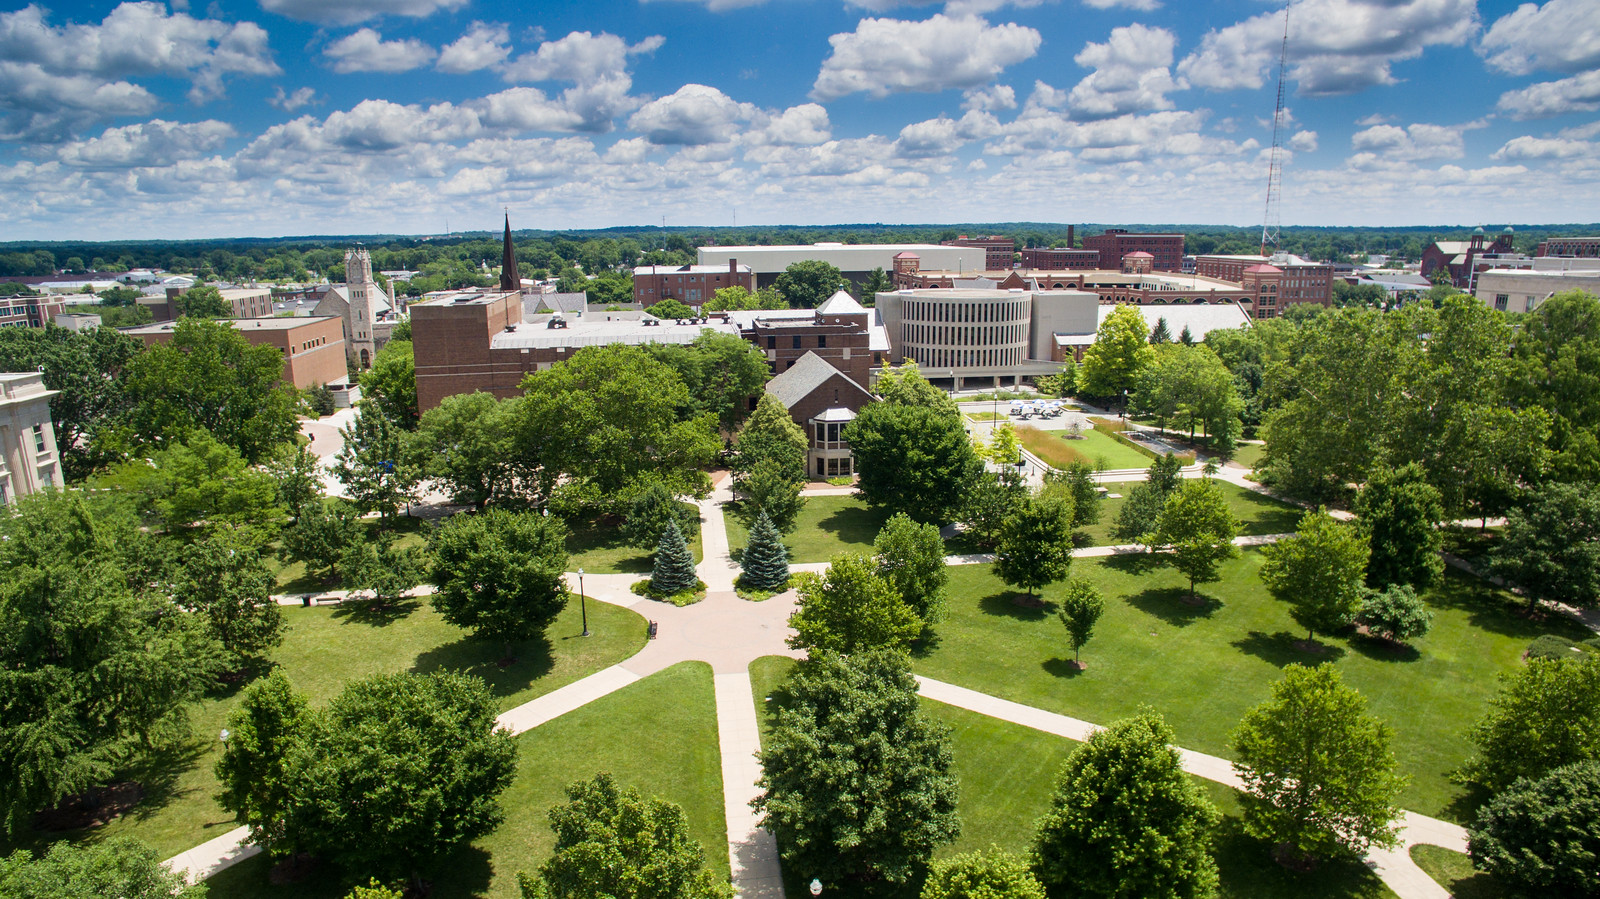 Overview of campus from the quad